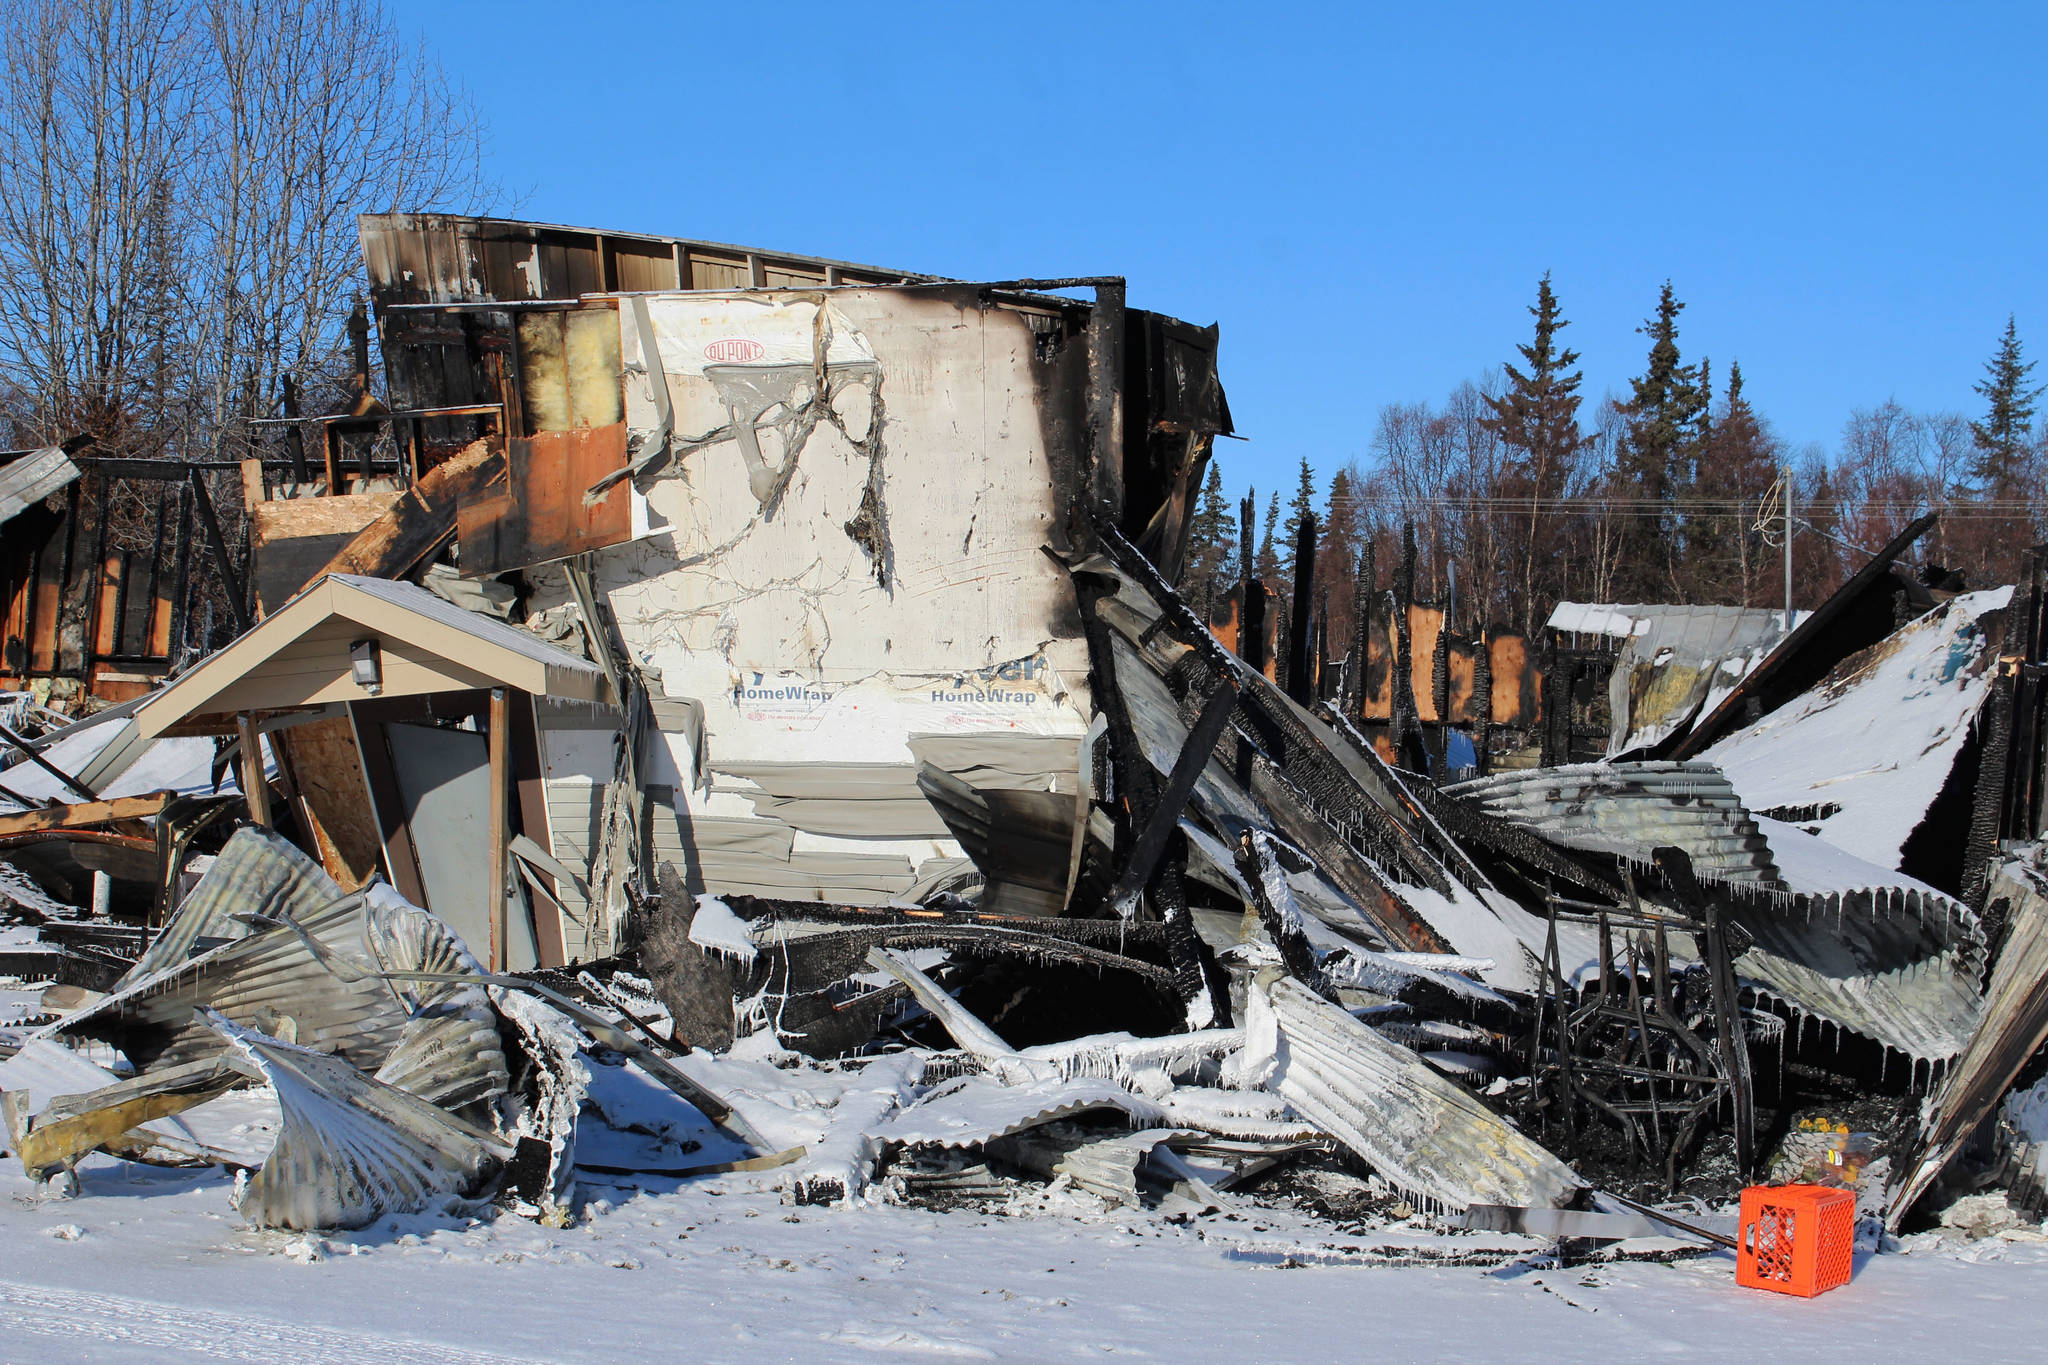 Triumvirate Theatre is pictured on Monday, Feb. 22, 2021 in Nikiski, Alaska. The building burned in a fire on Feb. 20. (Ashlyn O’Hara/Peninsula Clarion)